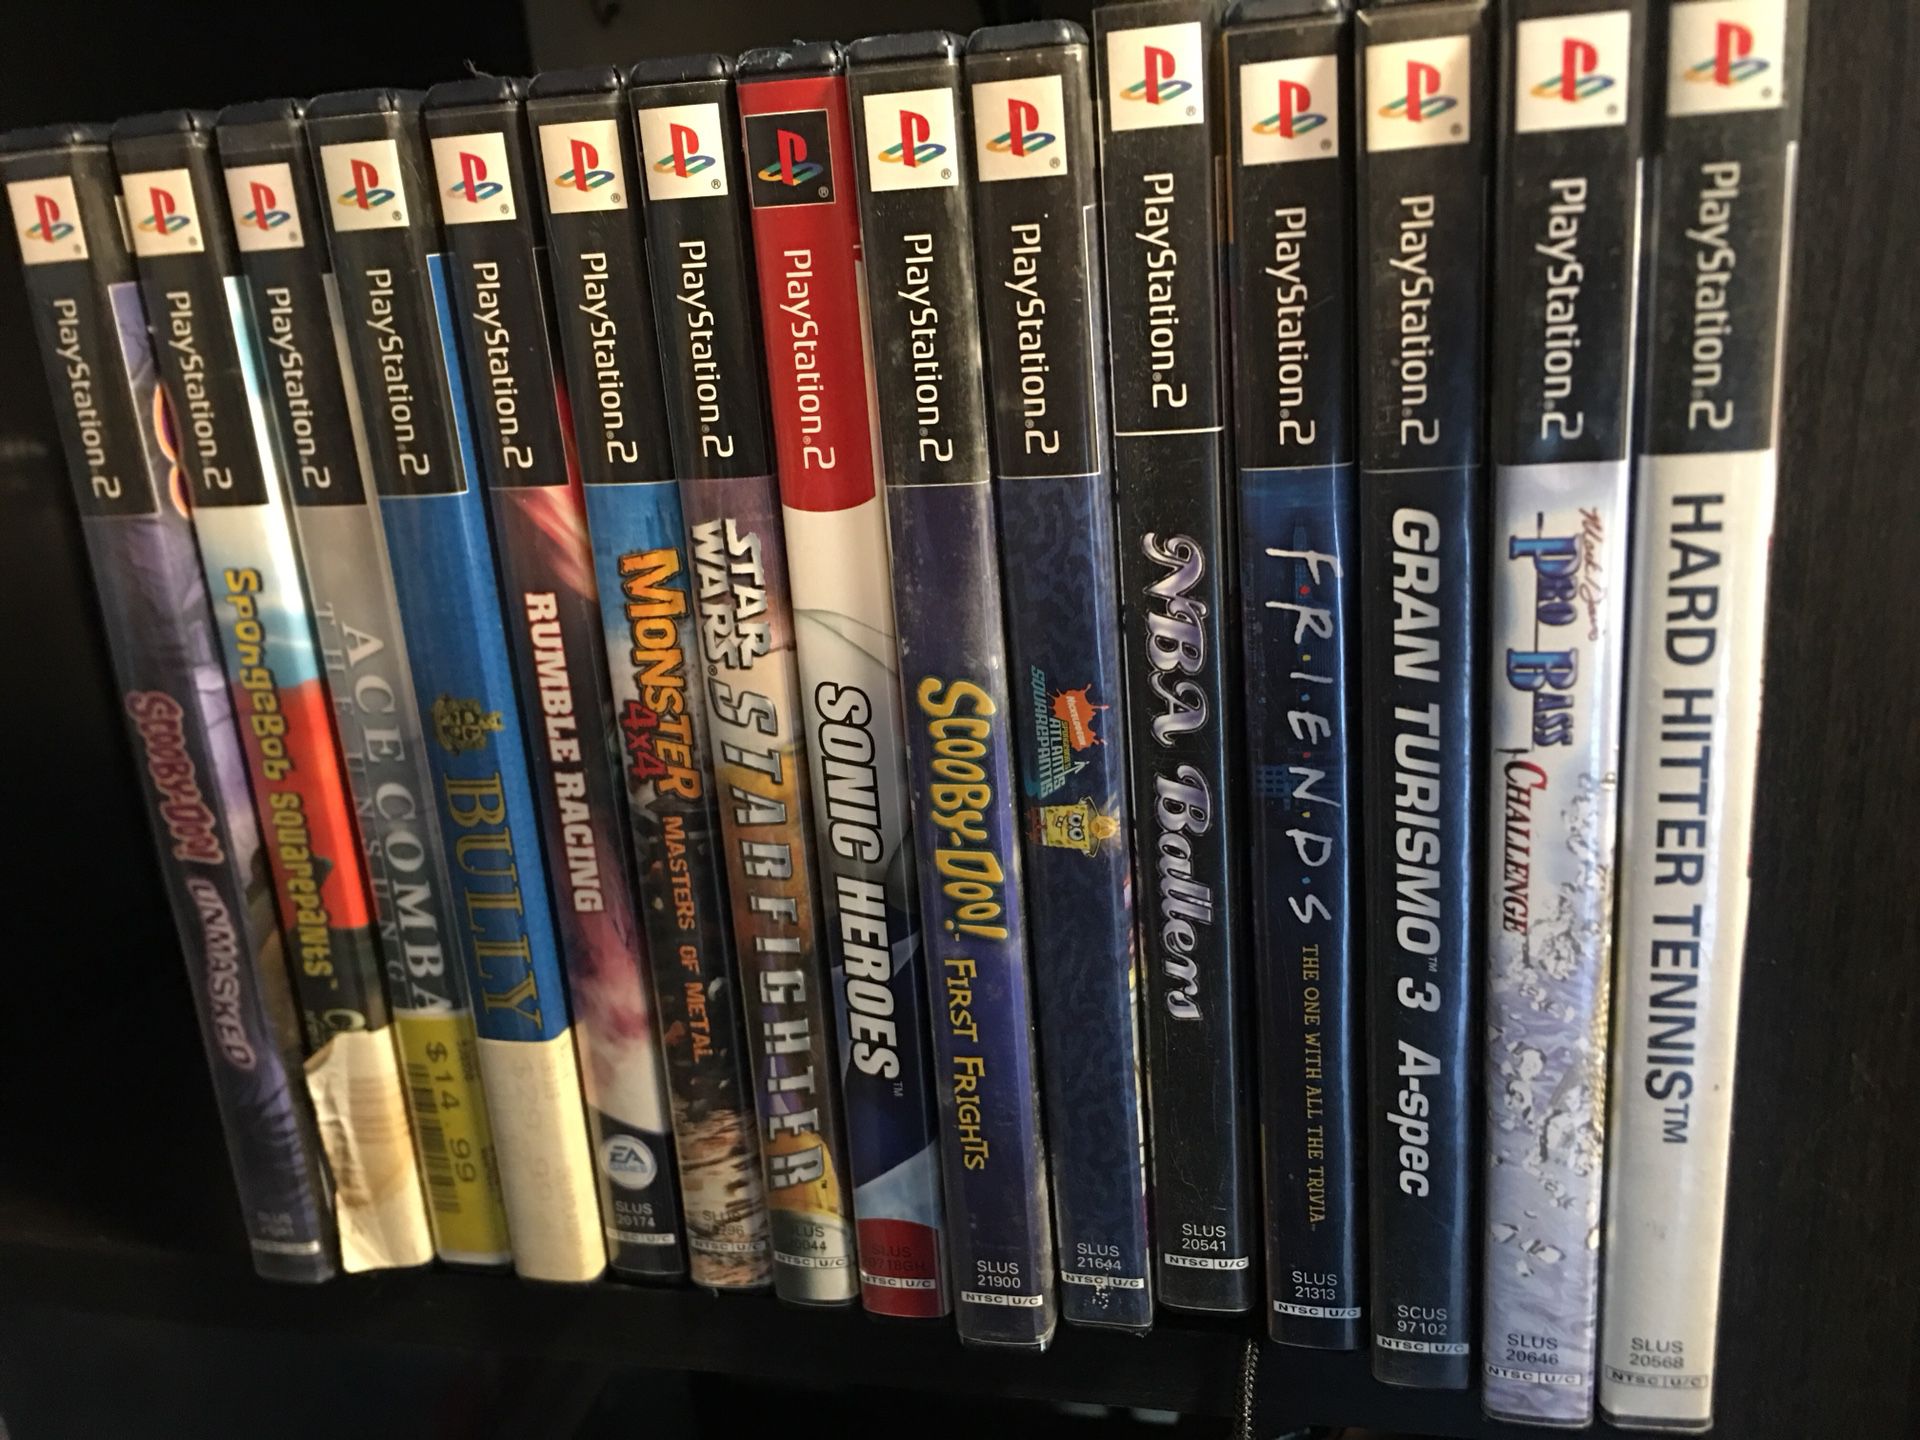 Grand Theft Auto San Andreas (PS2) $15 for Sale in Houston, TX - OfferUp